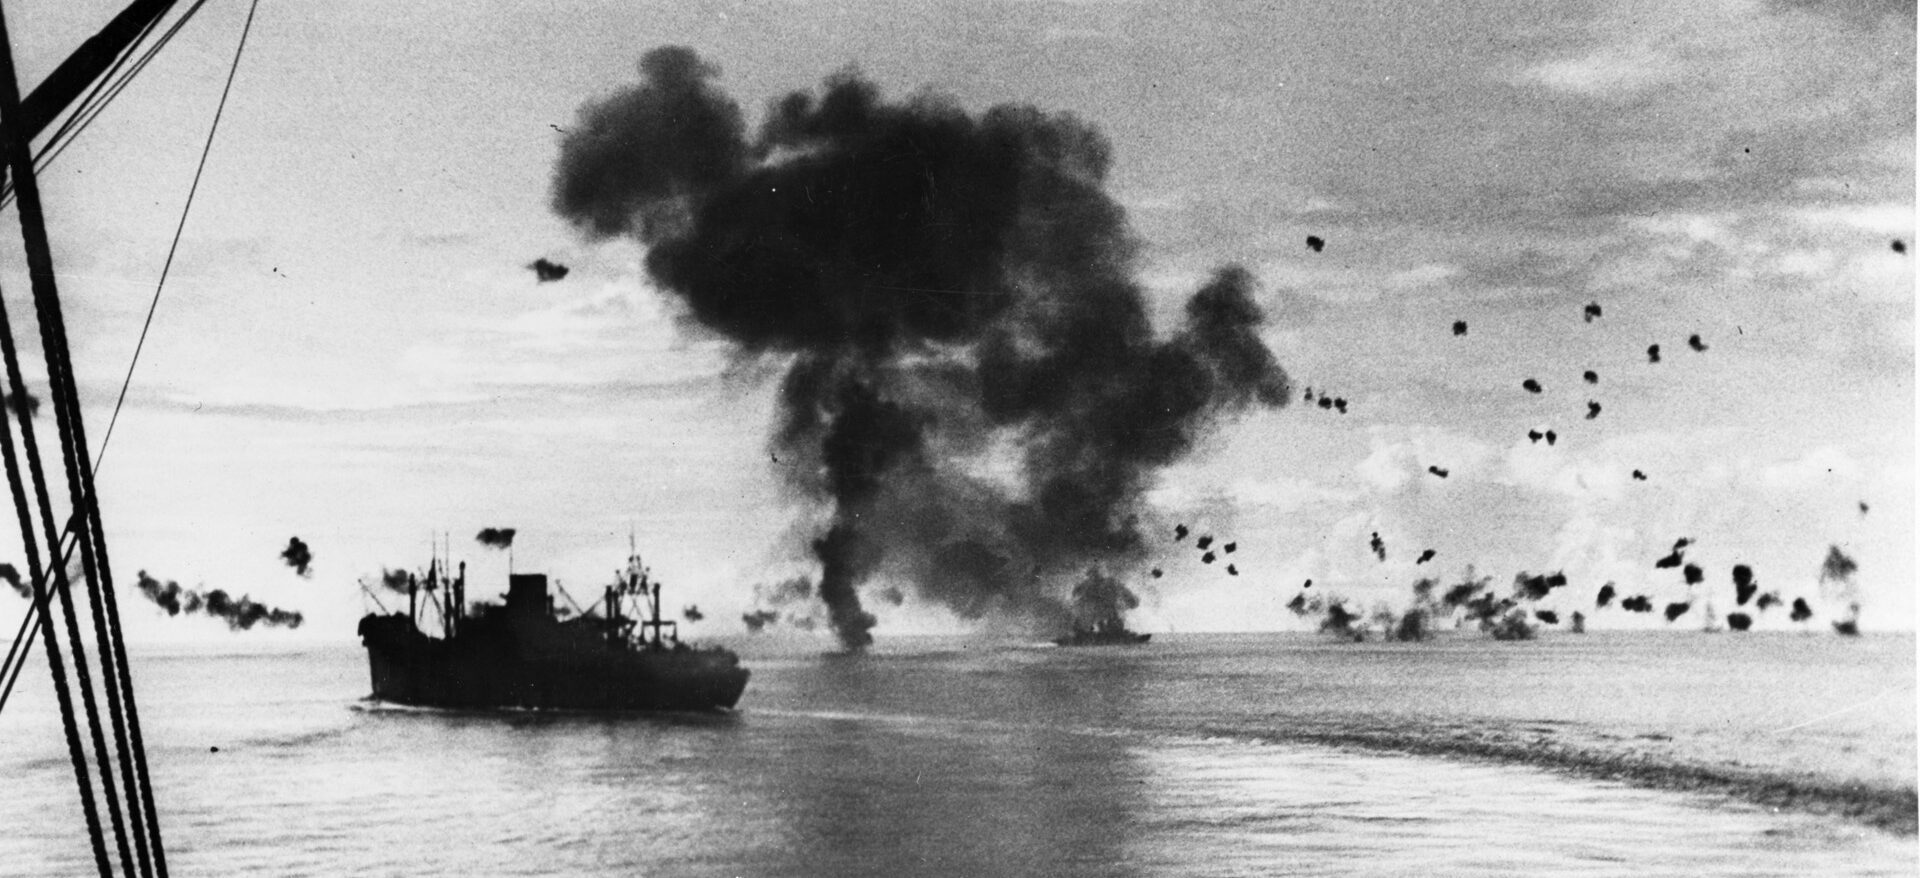 On November 12, 1942, Gwin and other ships were attacked by Japanese aircraft off Guadalcanal. A Japanese plane slammed into the cruiser USS San Francisco, right, causing 50 casualties.